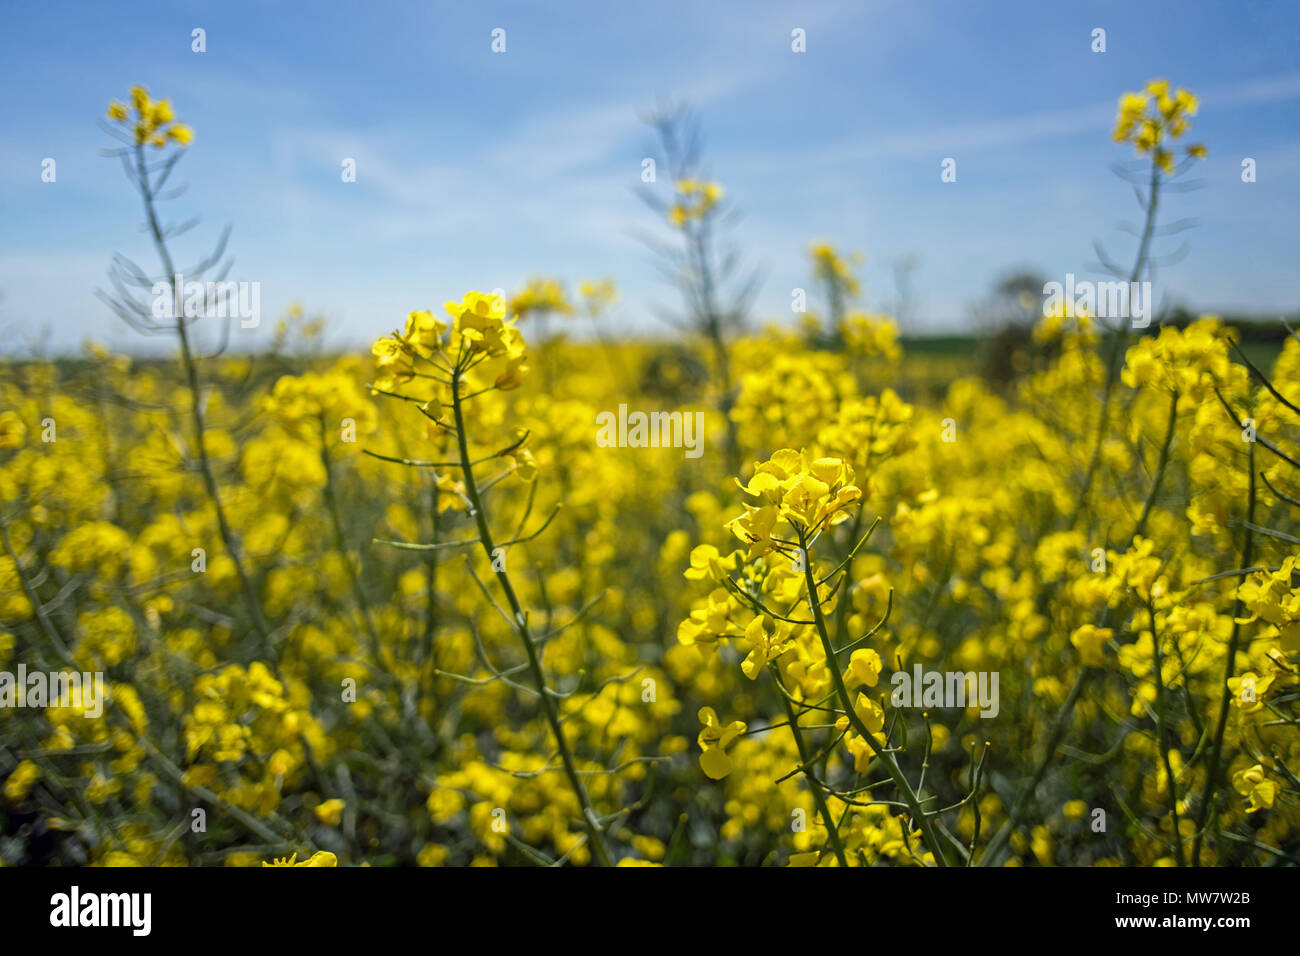 Shallow depth of field of oil seed rape crop Stock Photo